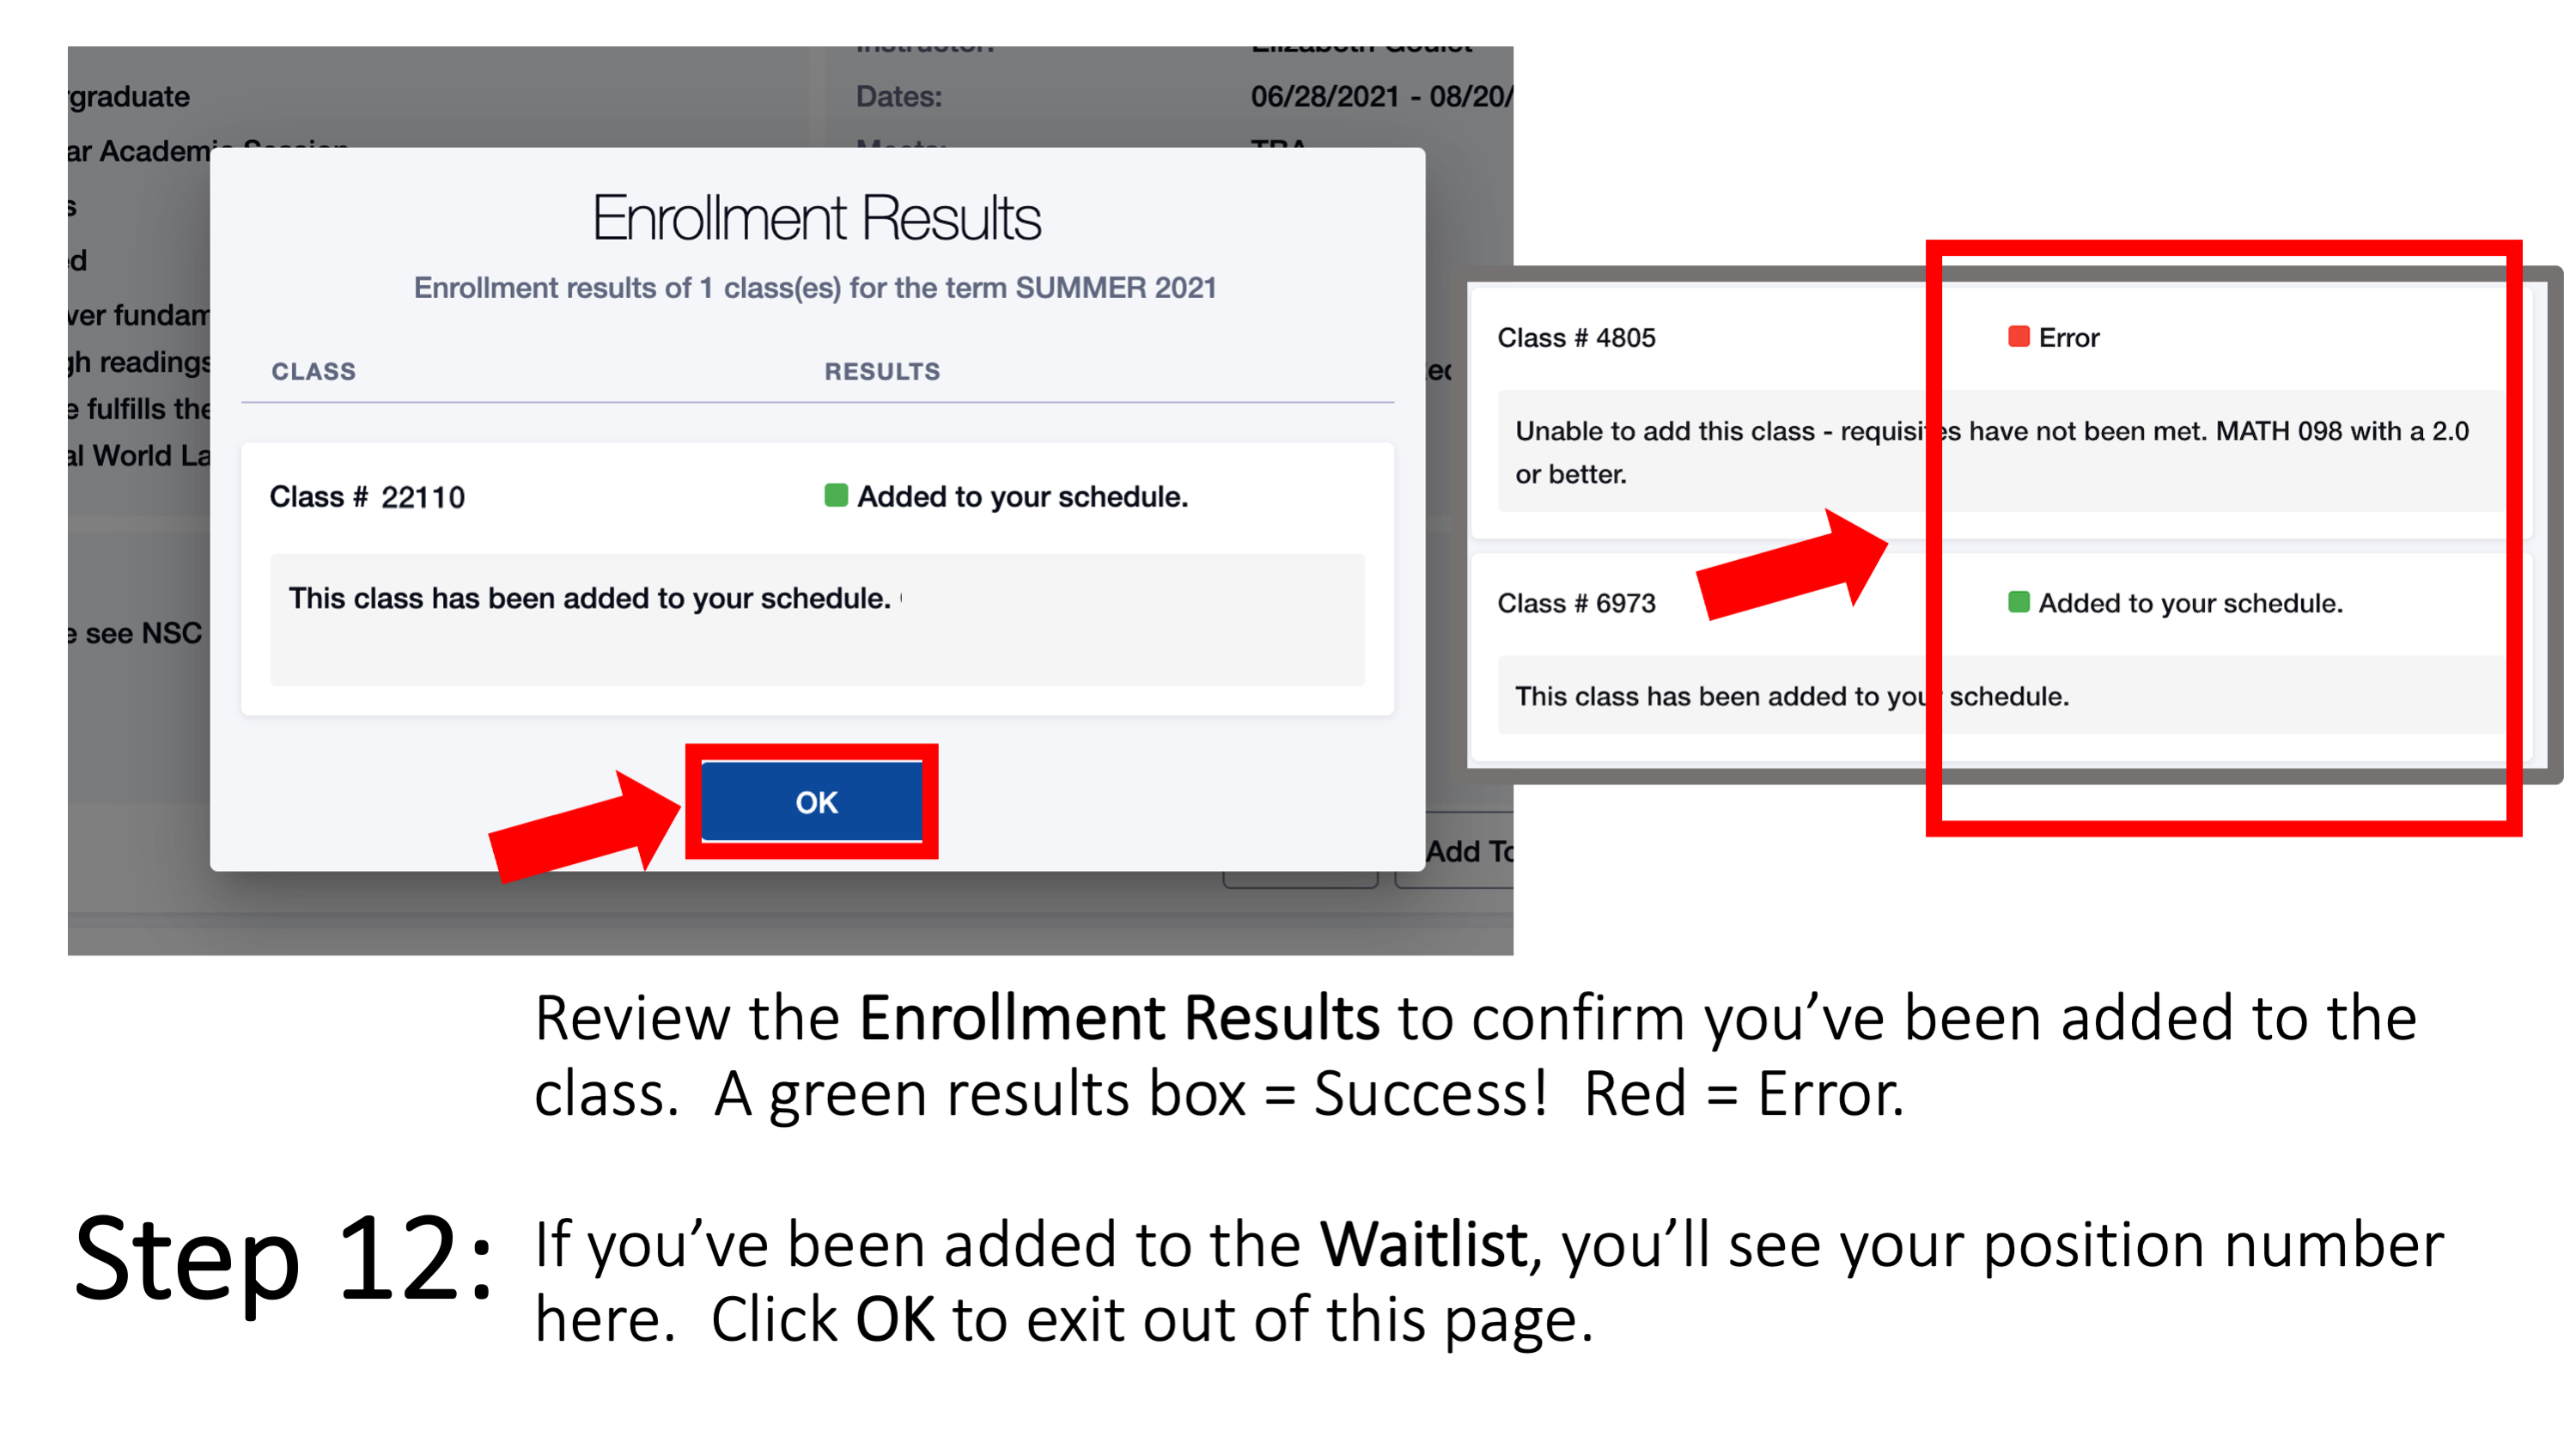 Step 12: Review the Enrollment Results to confirm you’ve been added to the class.  A green results box = Success! Red = Error. If you’ve been added to the Waitlist, you’ll see your position number here.  Click OK to exit out of this page.